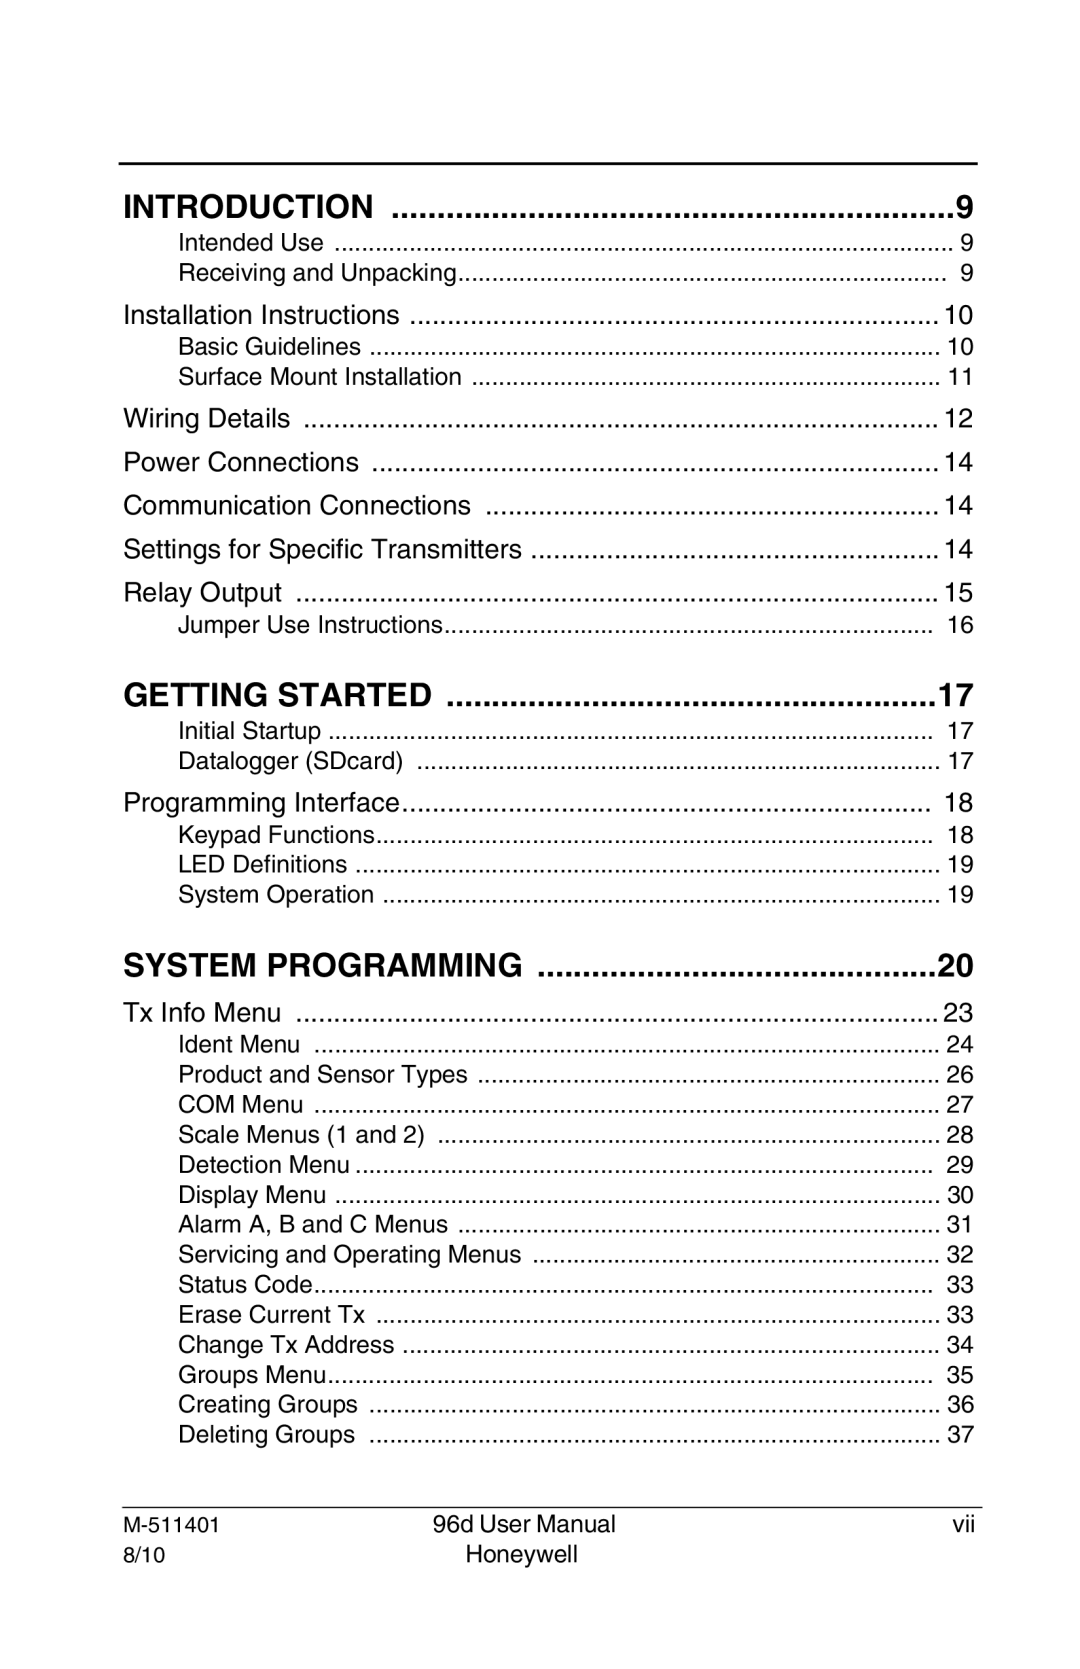 Honeywell 96D user manual Introduction, Getting Started, System Programming 